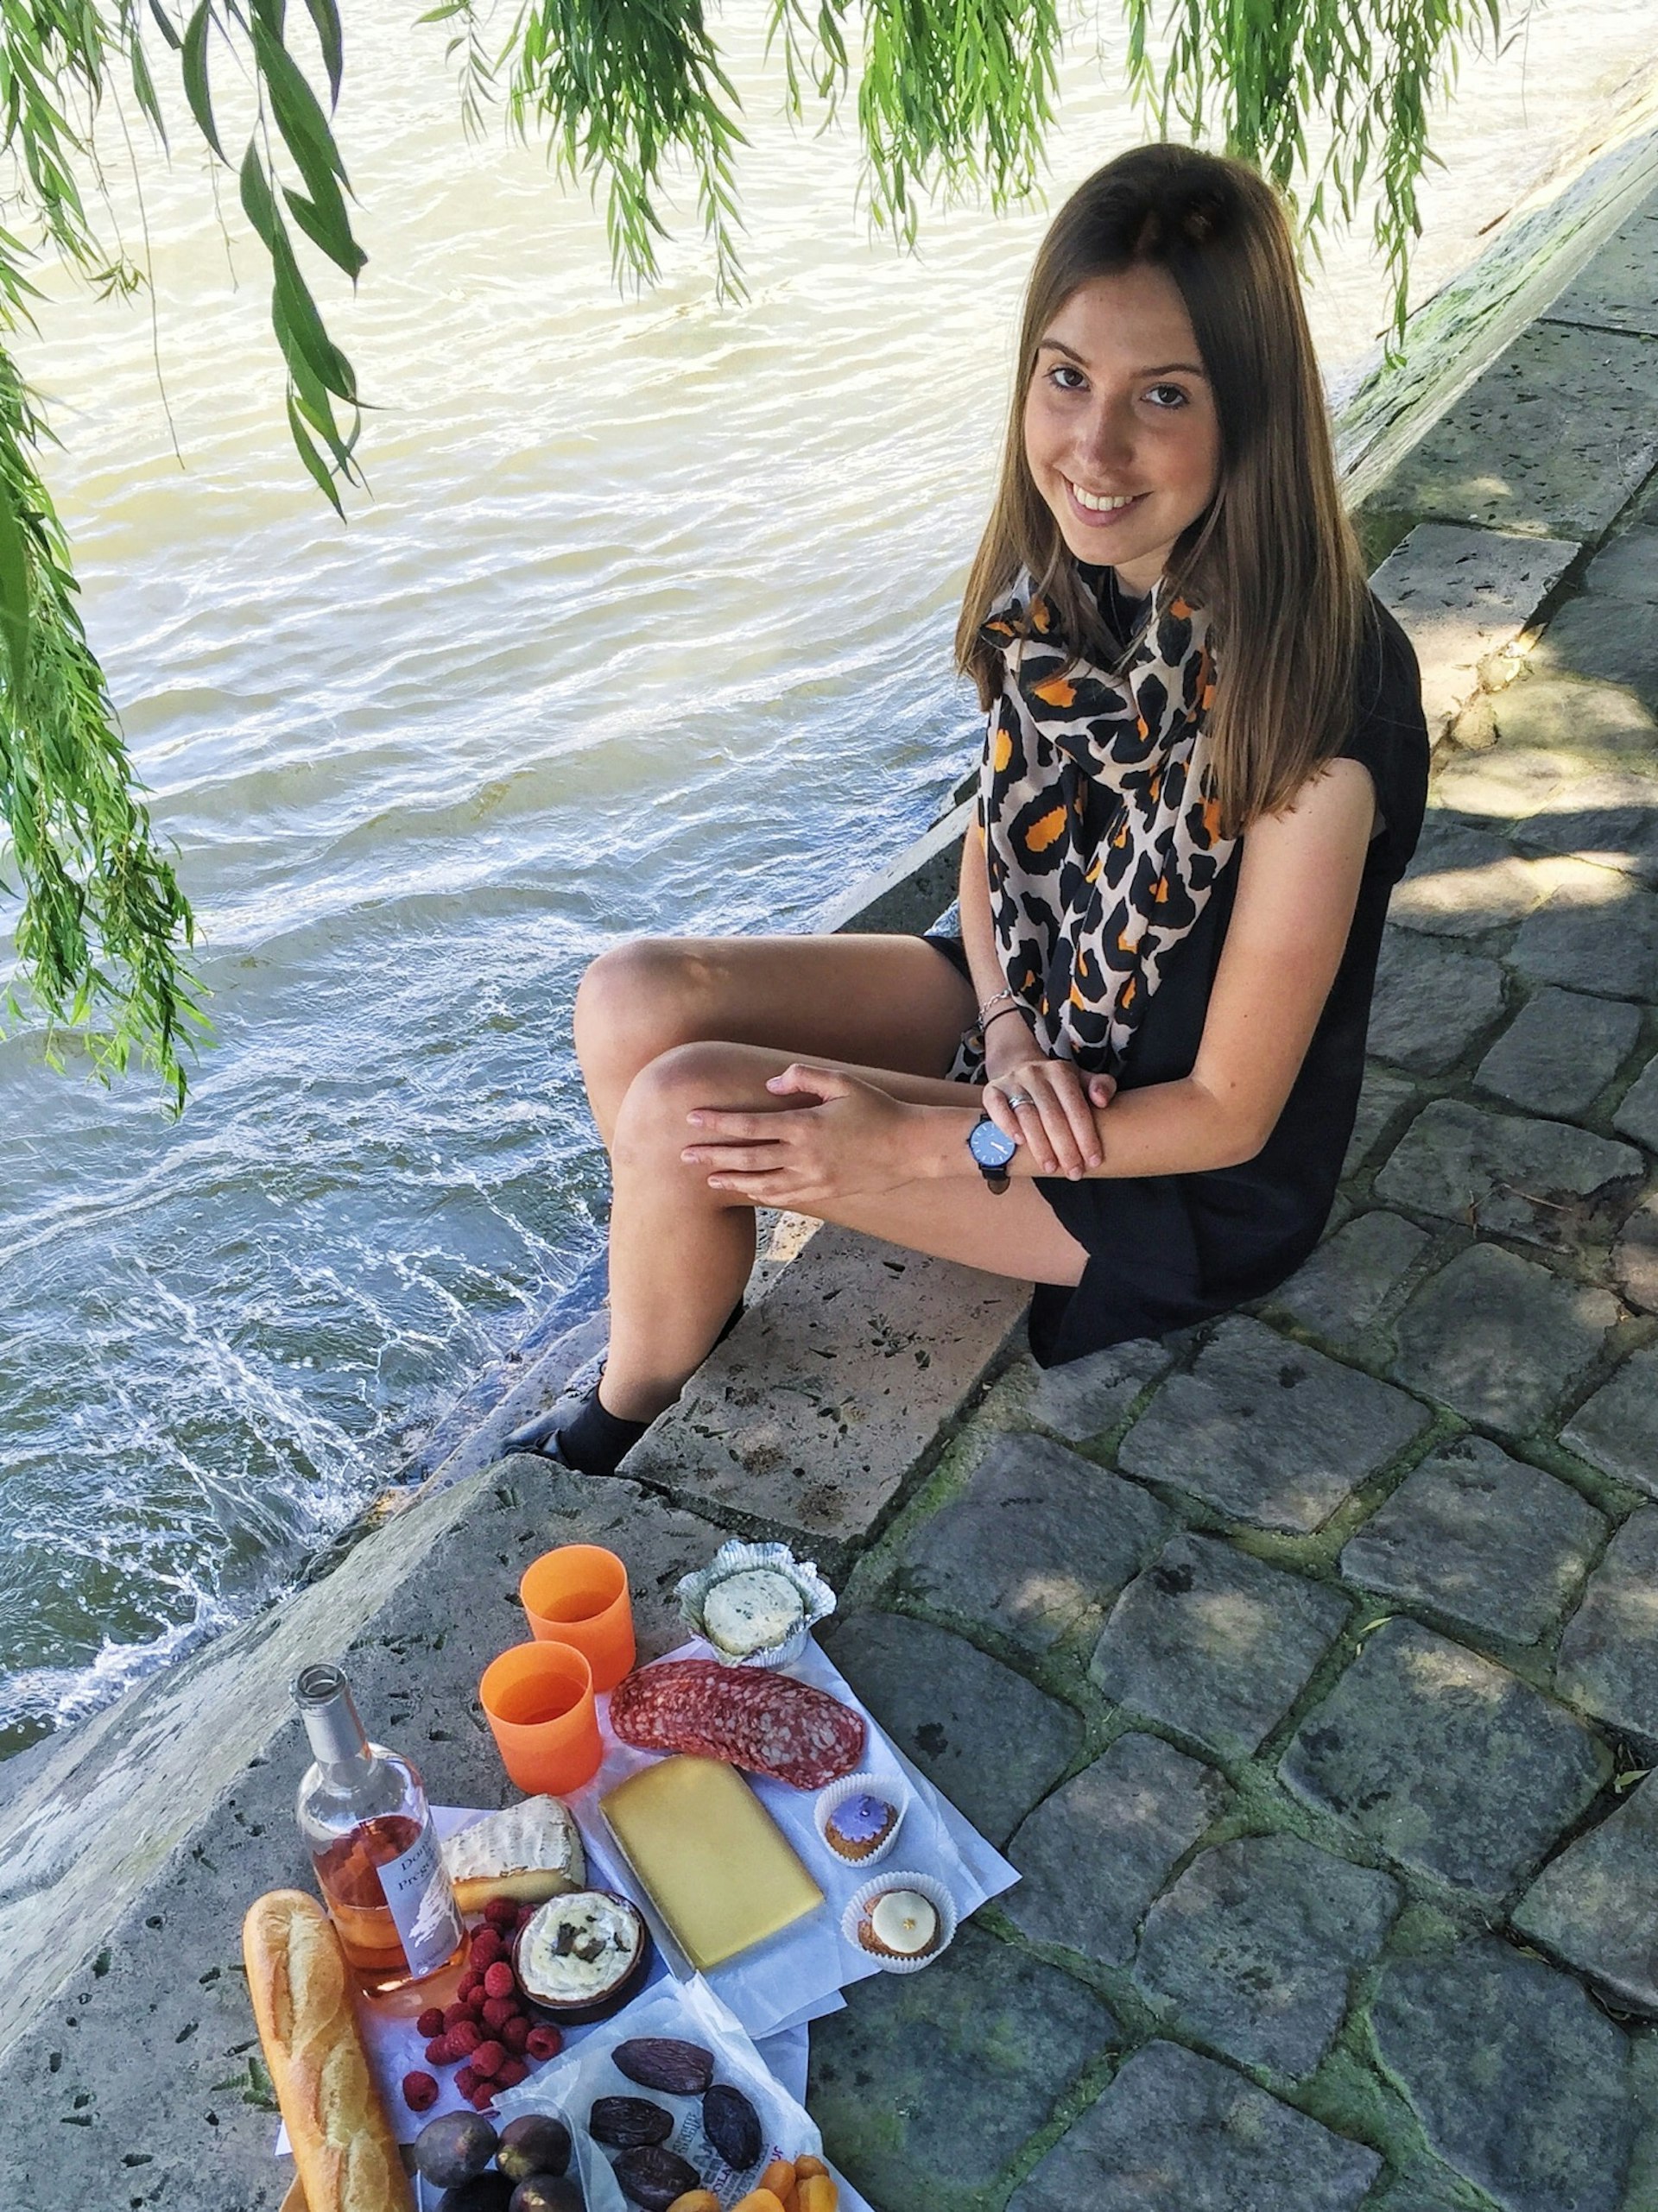 A woman smiles at the camera. She sits on the bank of a river with a small picnic laid out next to her